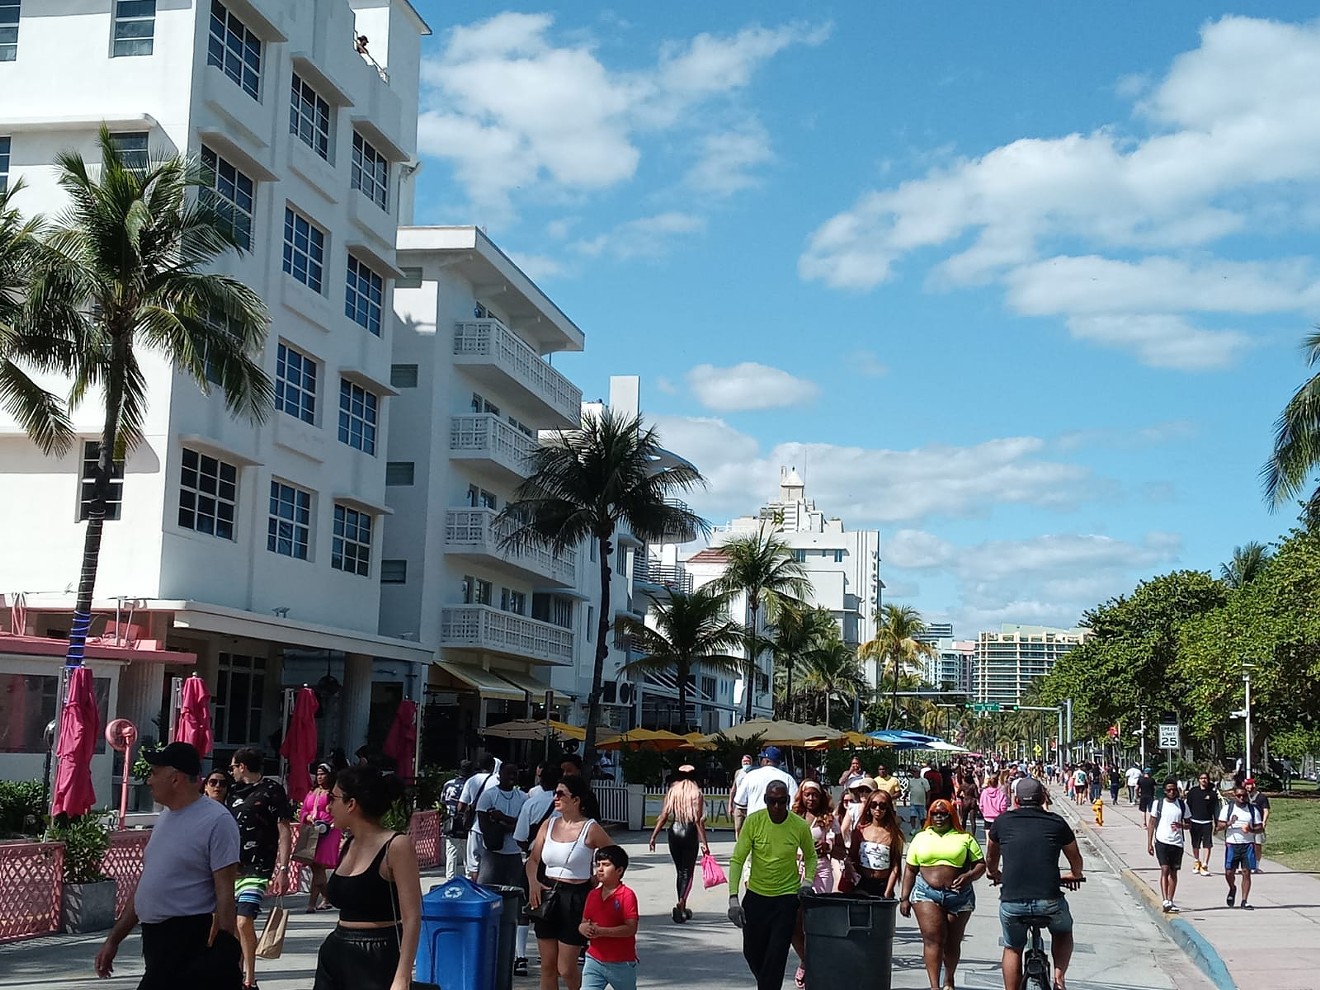 Spring break has seen a large influx of tourists on South Beach's Ocean Drive, sometimes to the detriment of businesses.